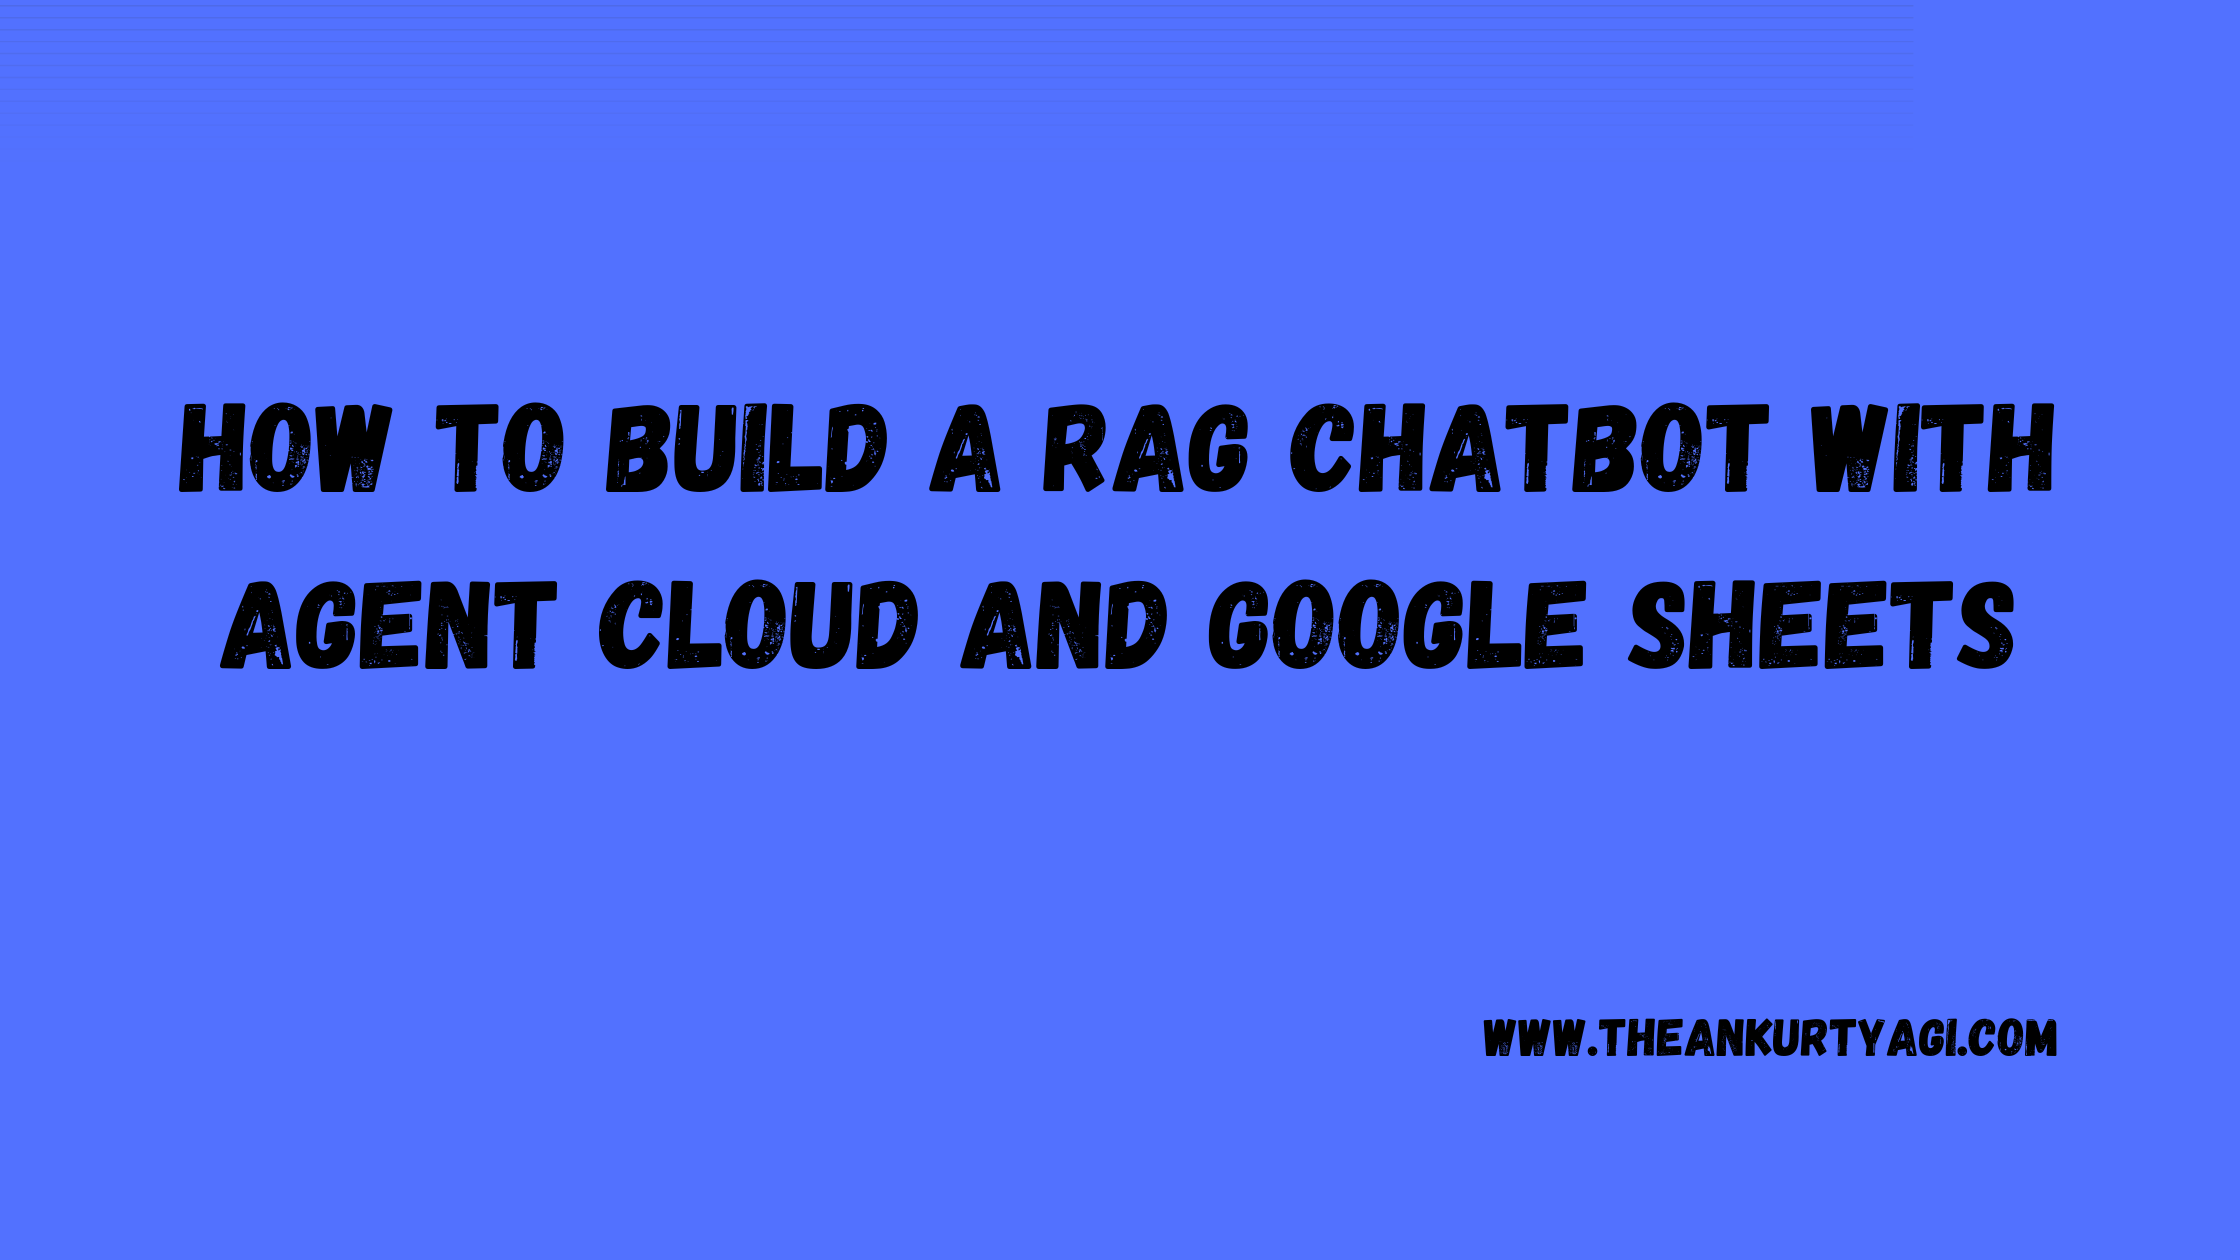 Image for How to Build a RAG Chatbot with Agent Cloud and Google Sheets